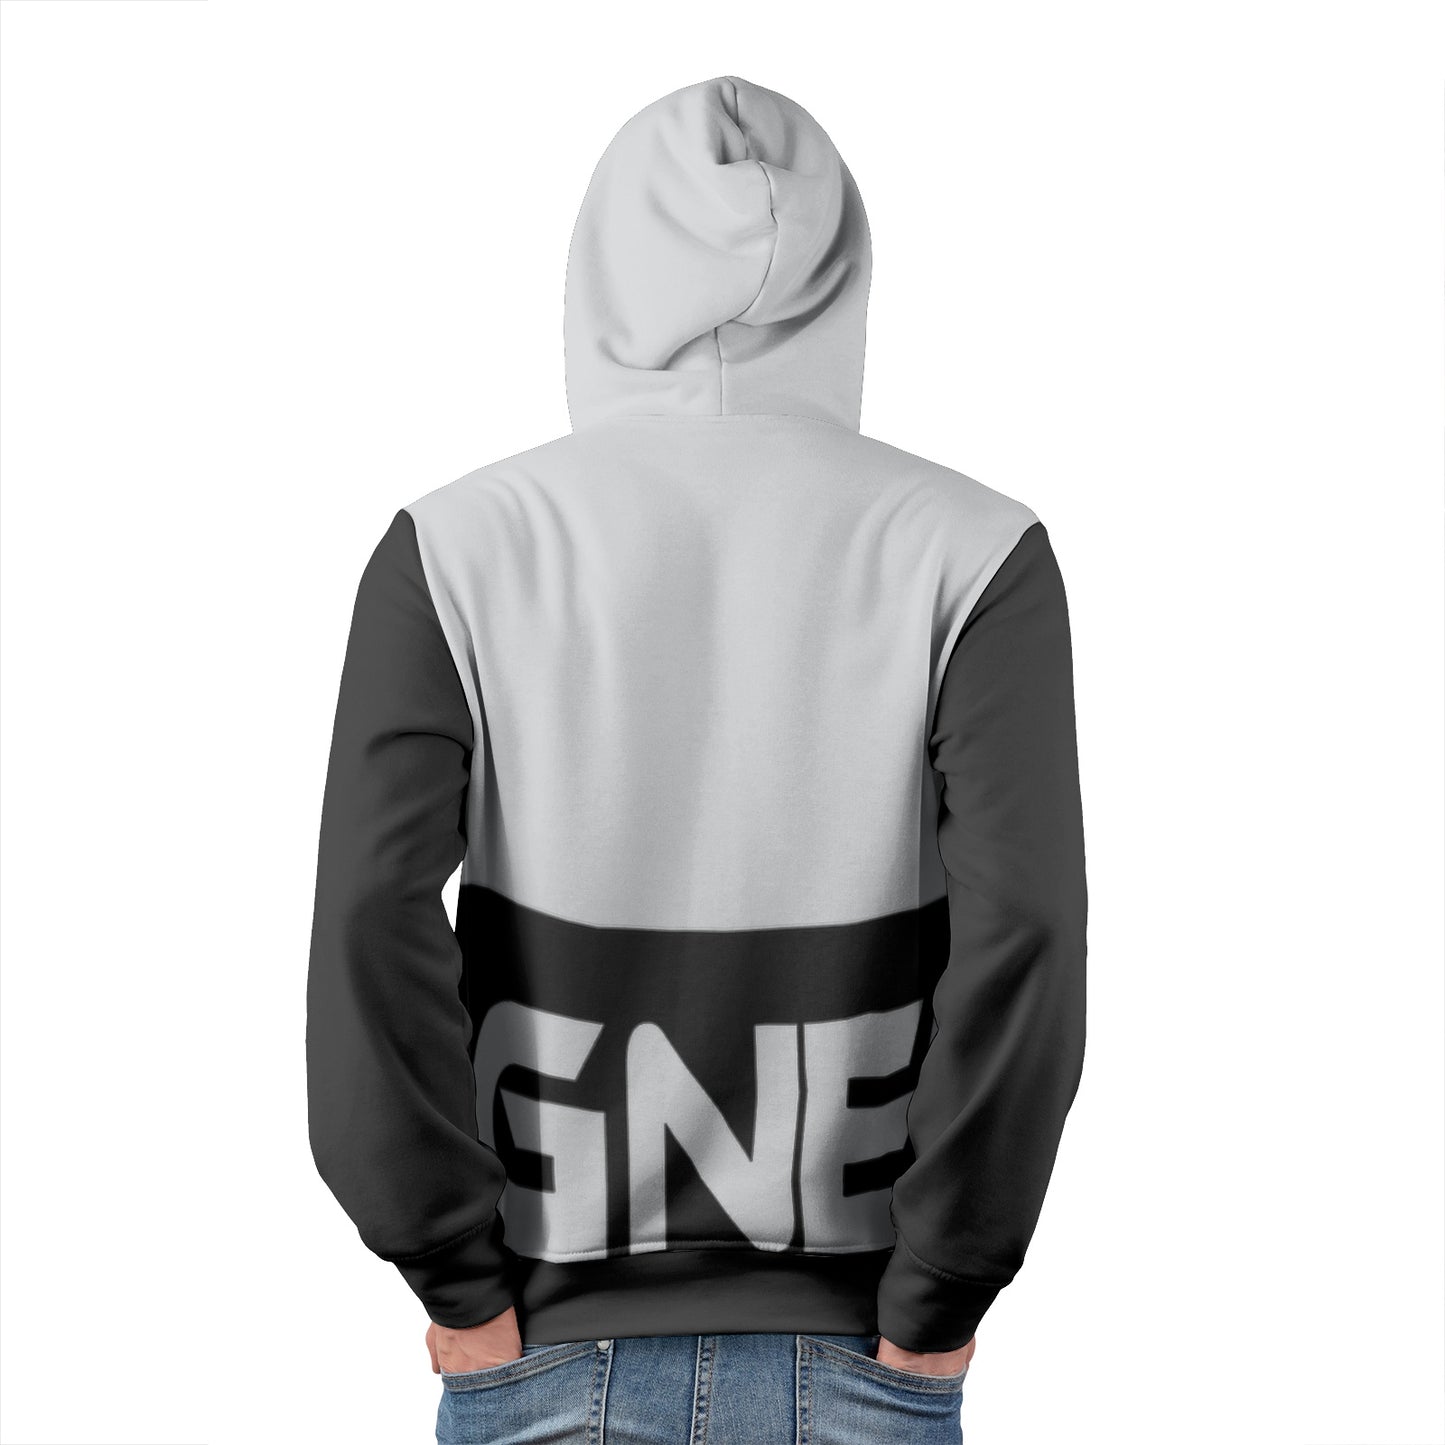 Magnet BNG Men's Pullover Hoodies